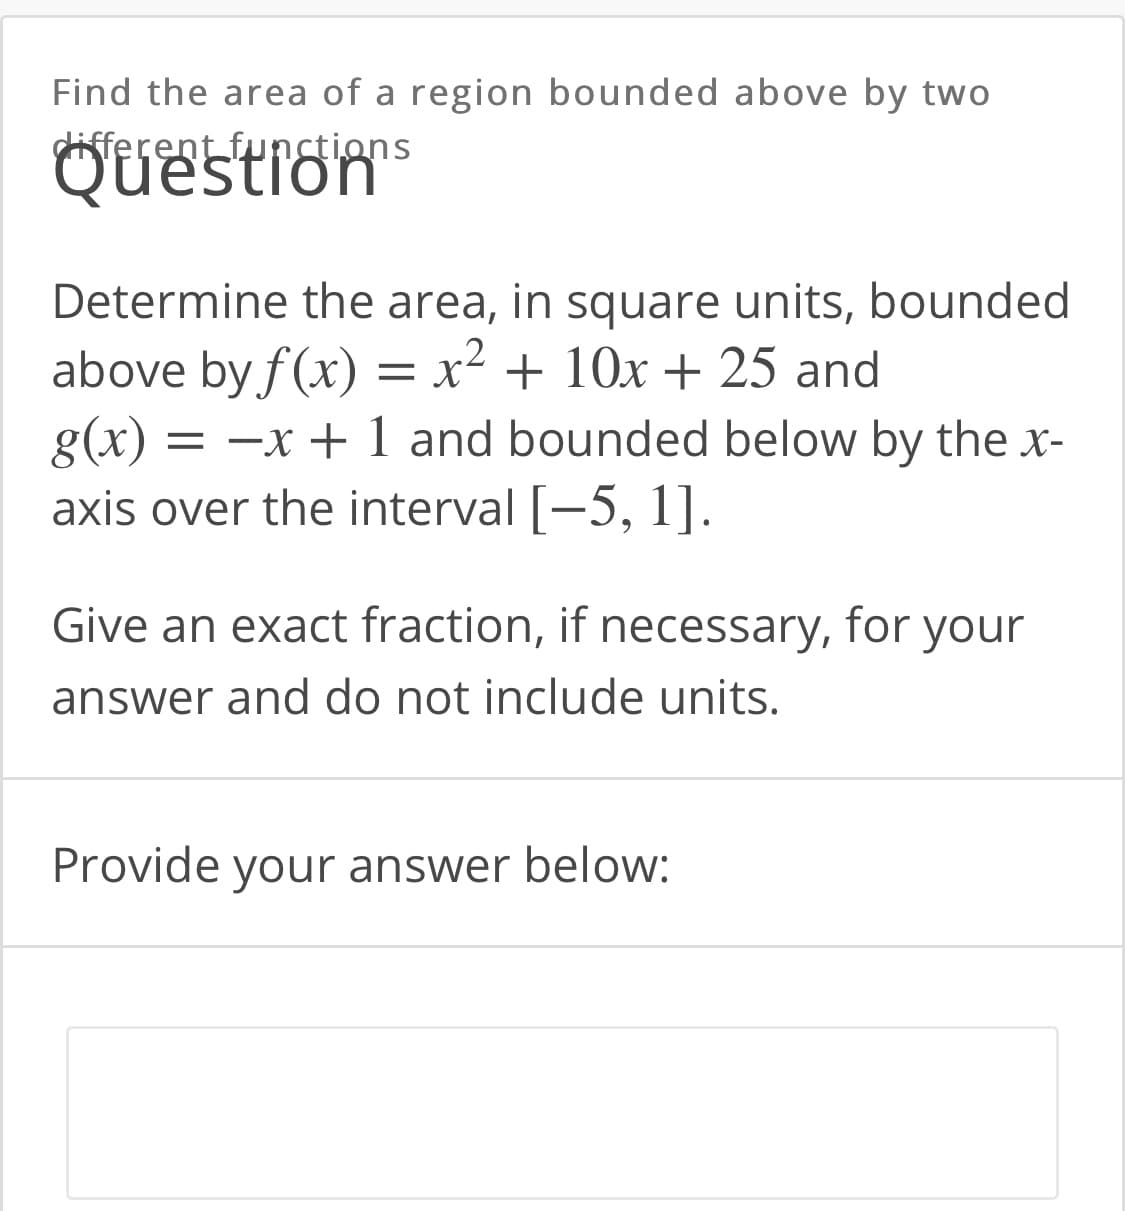 Find the area of
region bounded above by two
different functions
Question™
Determine the area, in square units, bounded
above by f(x) = x² + 10x + 25 and
g(x) :
axis over the interval [-5, 1].
= -x + 1 and bounded below by the x-
Give an exact fraction, if necessary, for your
answer and do not include units.
Provide your answer below:
